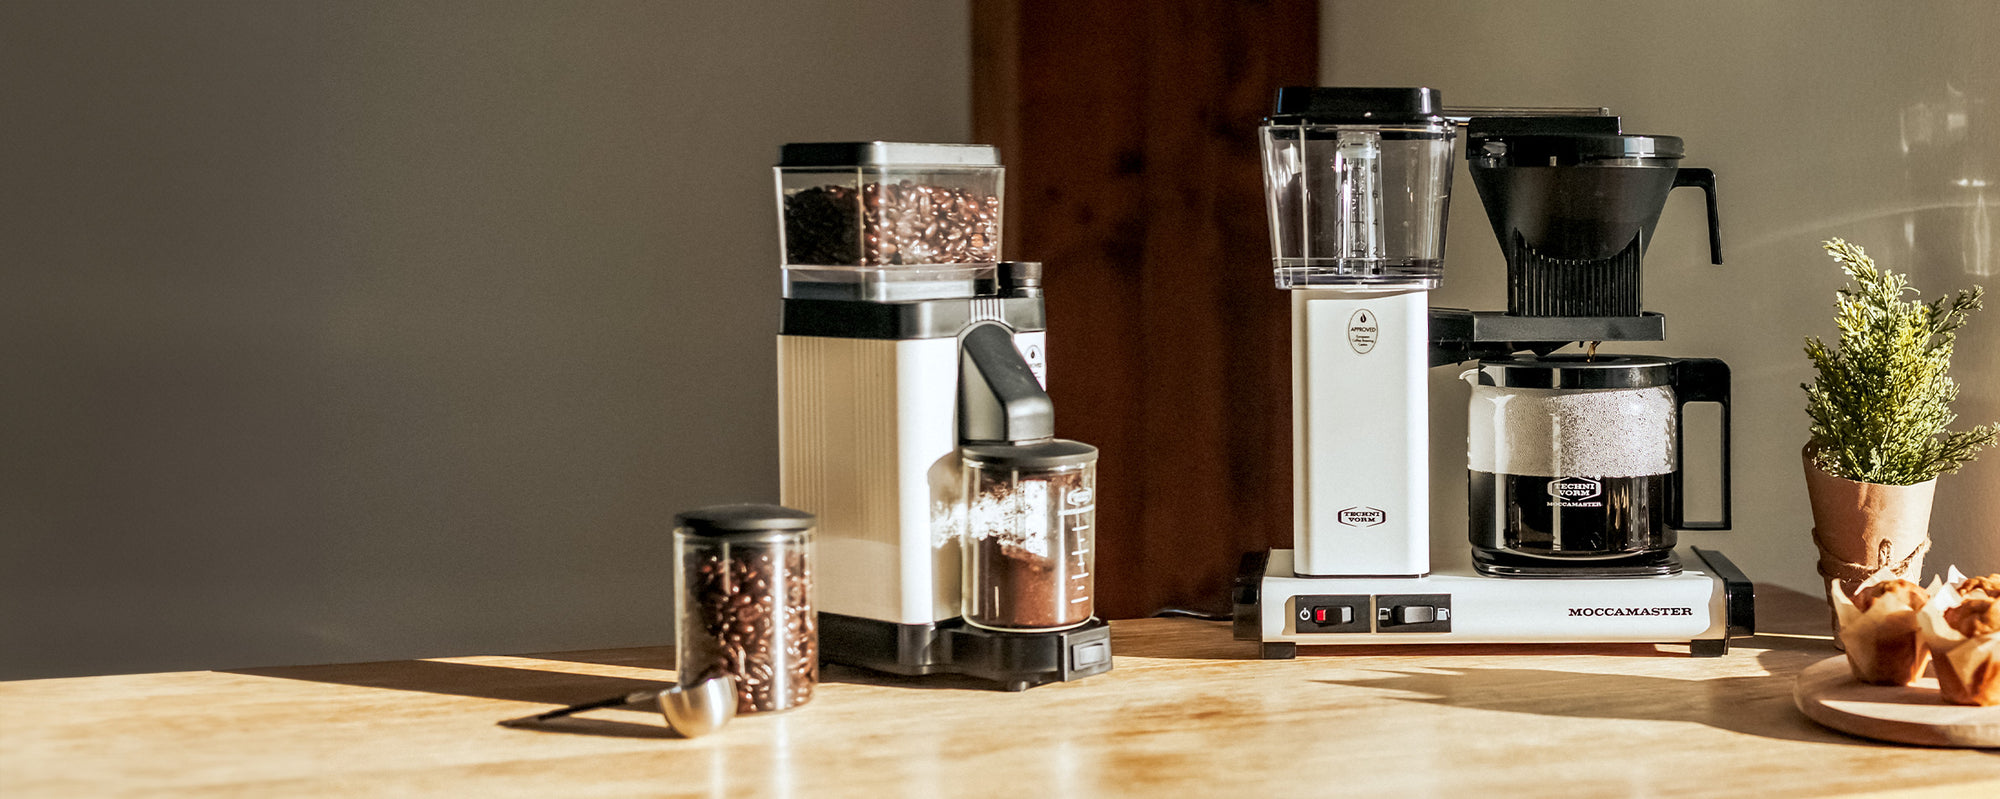 Moccamaster Coffee Maker Review: A Stylish Pour-Over Coffee Maker